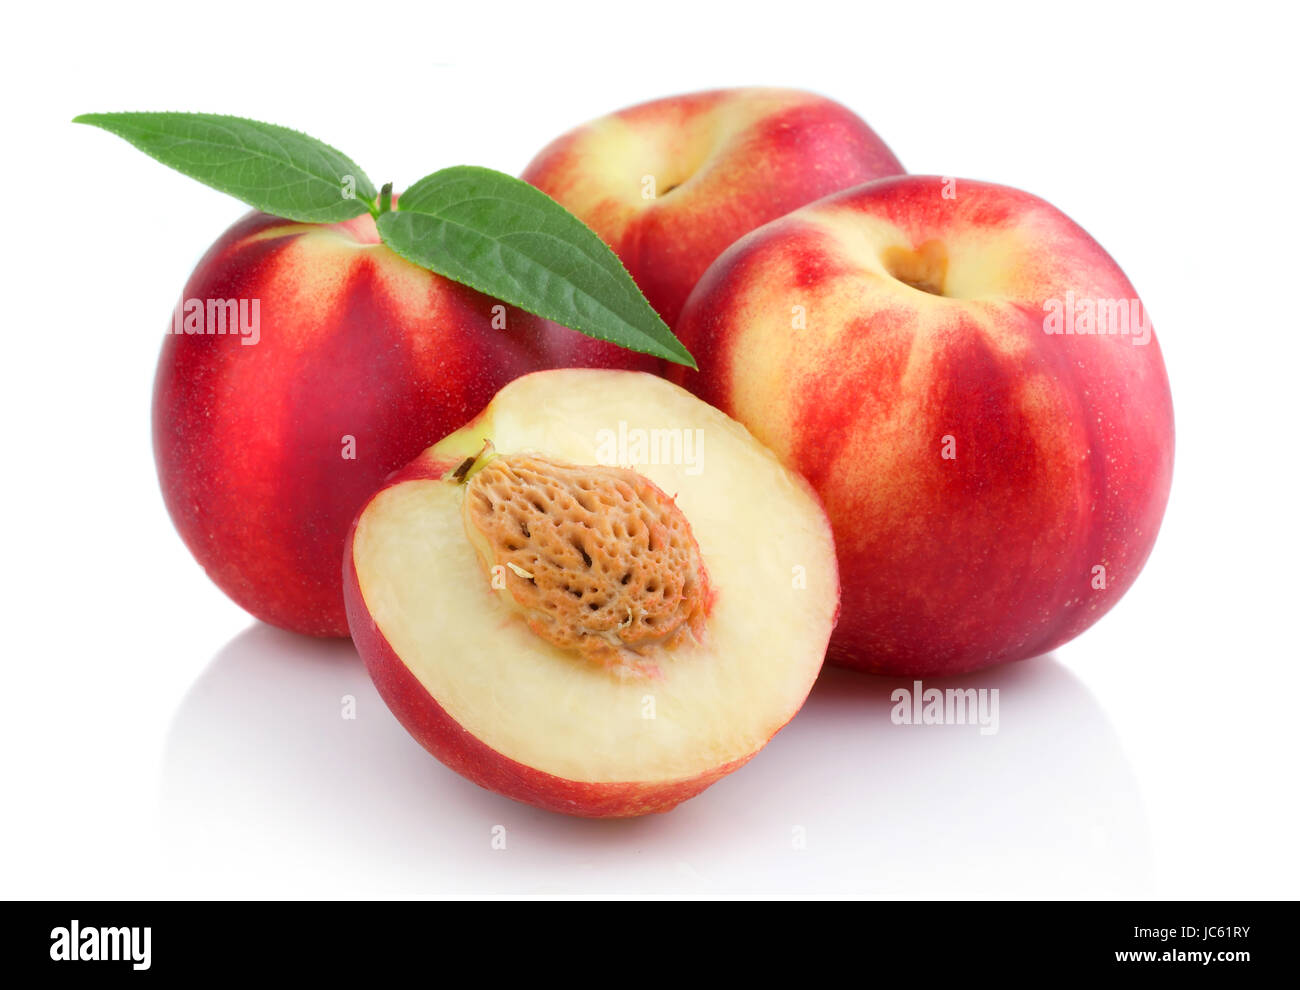 Three ripe peach (nectarine) fruits with slices isolated on white Stock Photo